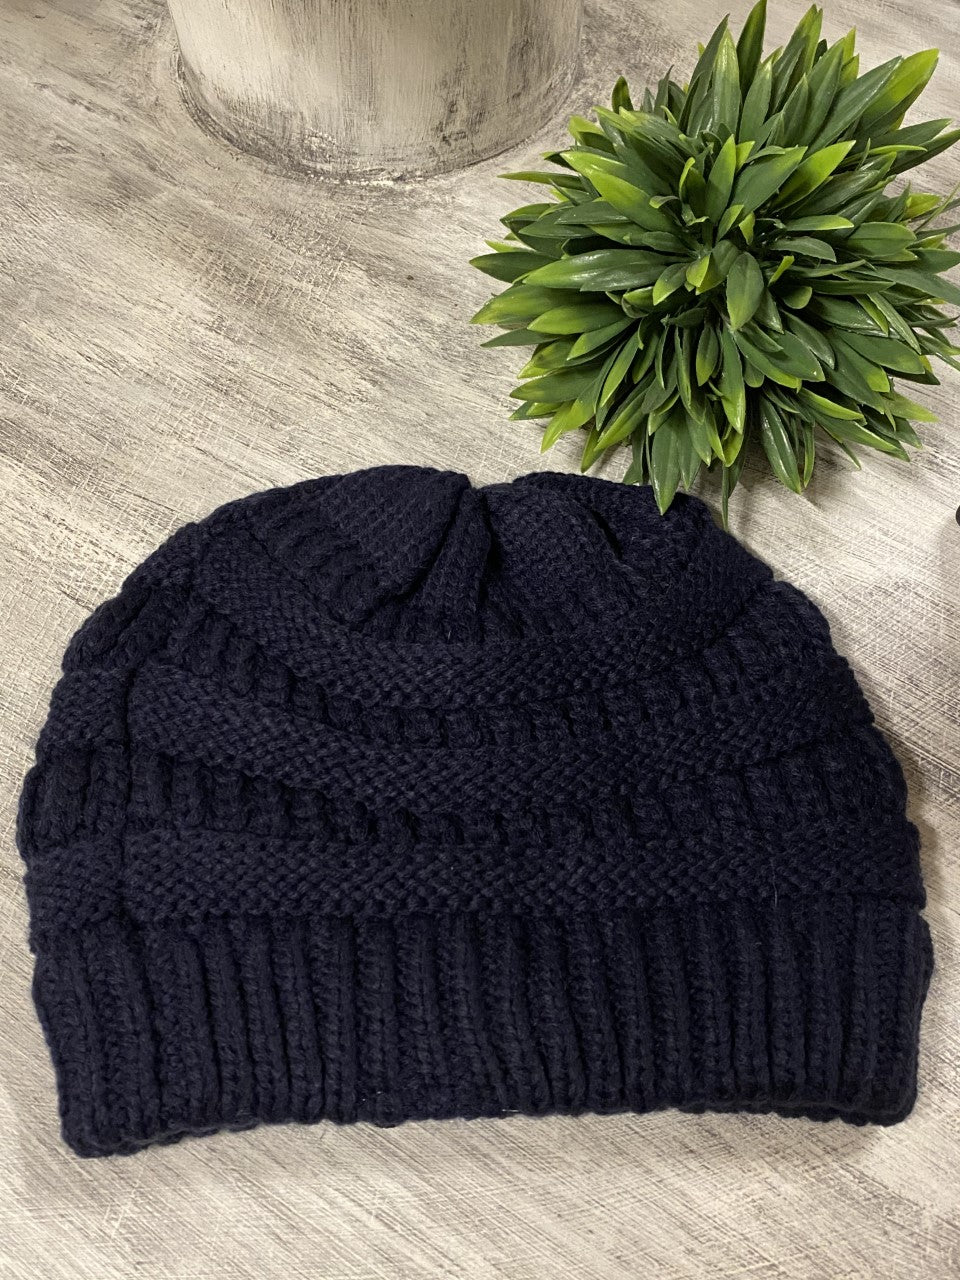 Navy Cable Knit Beanie Ladies As Shown